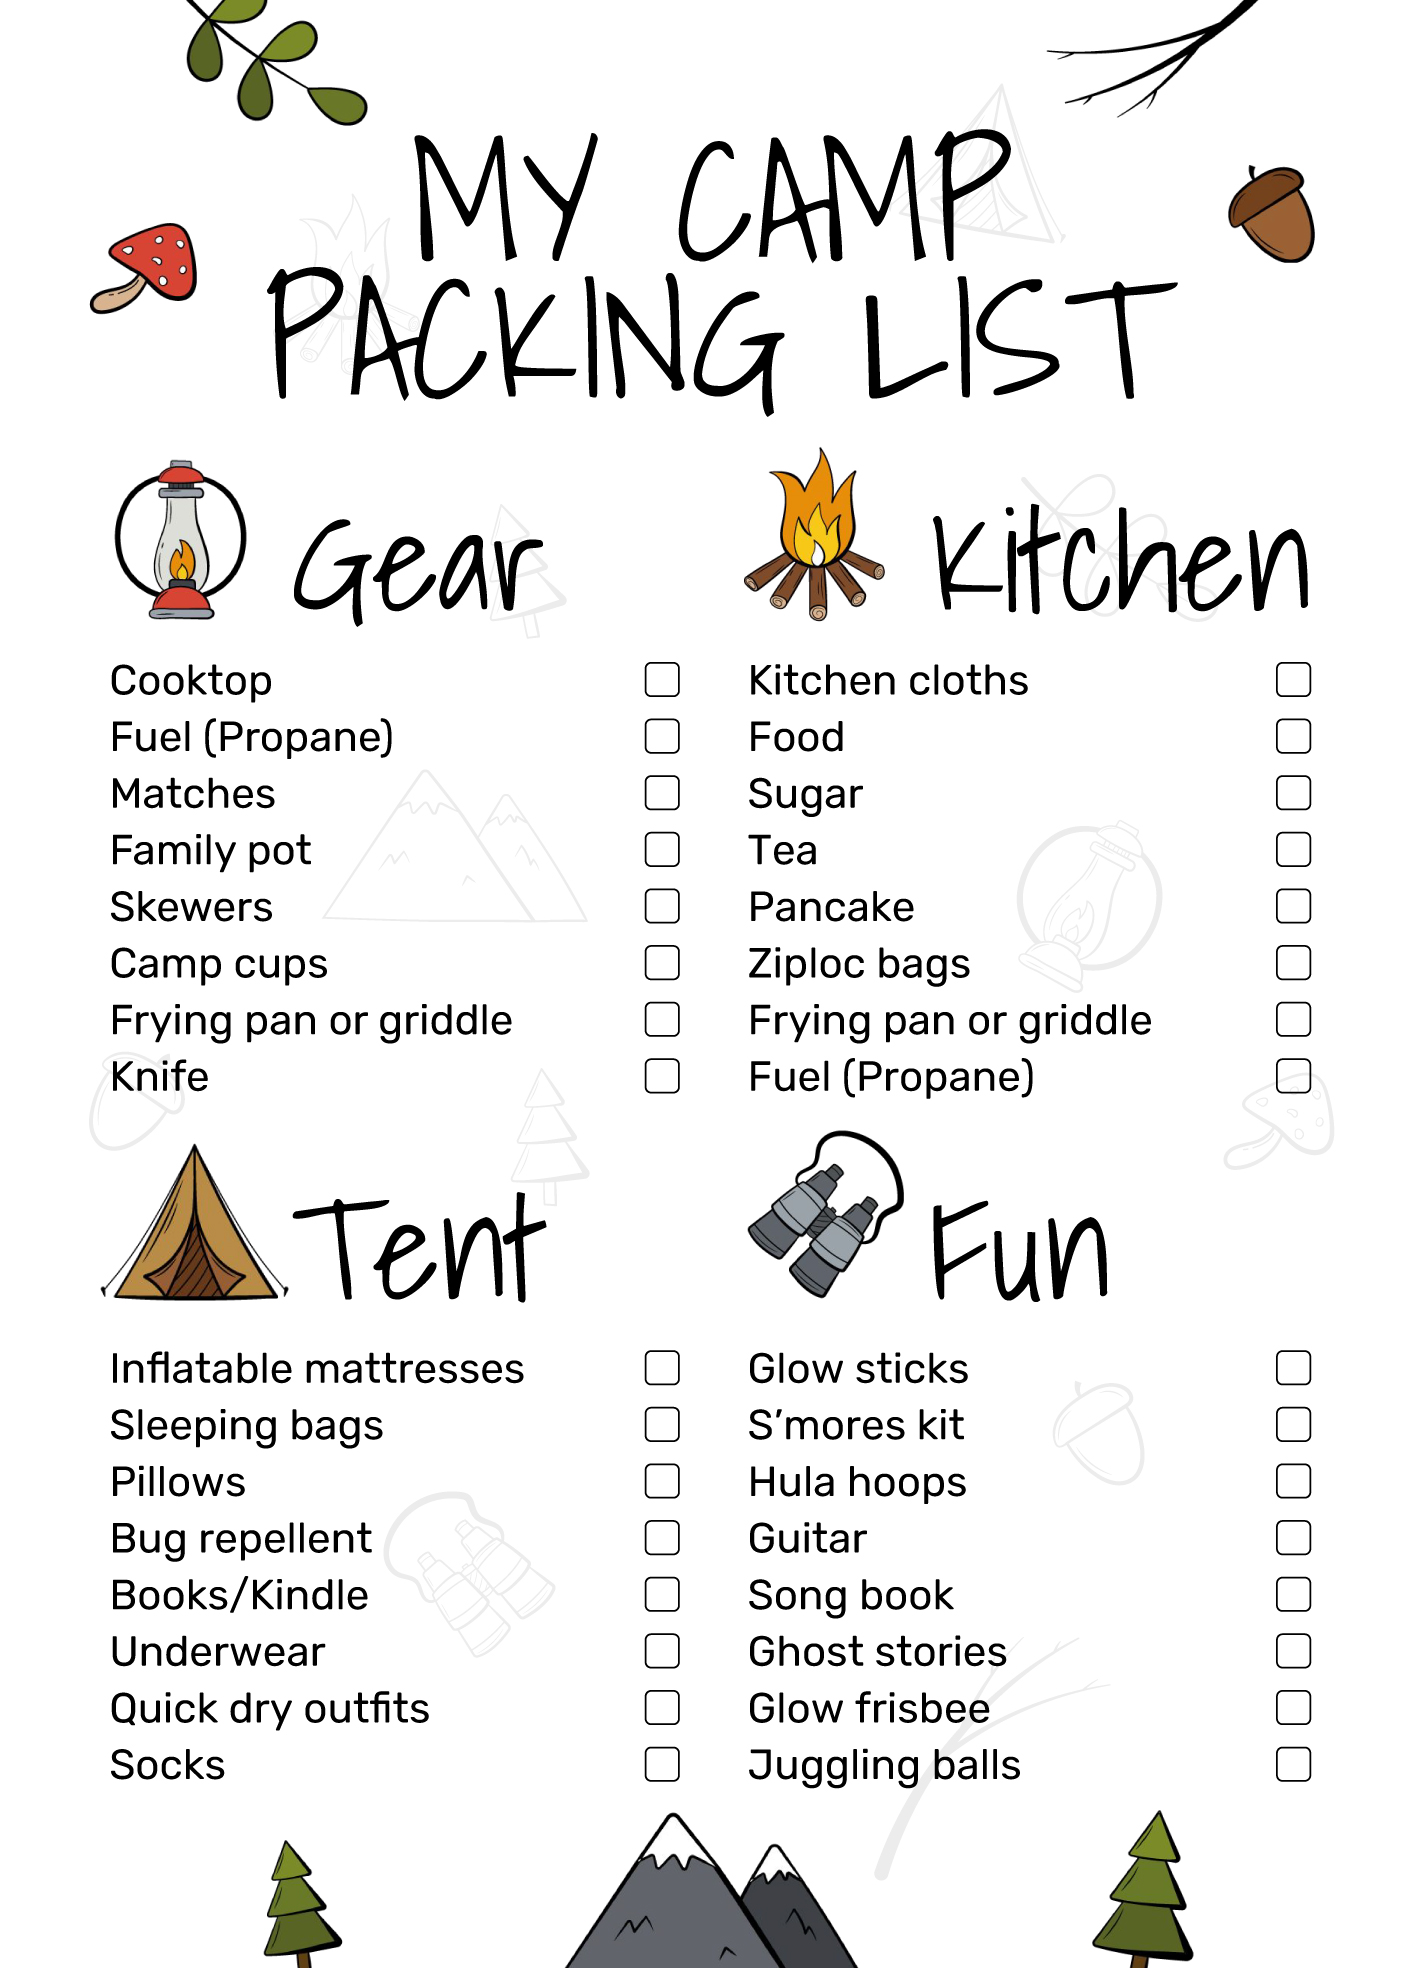 Camping Packing List PLUS Expert Camping Storage Ideas - Printable!